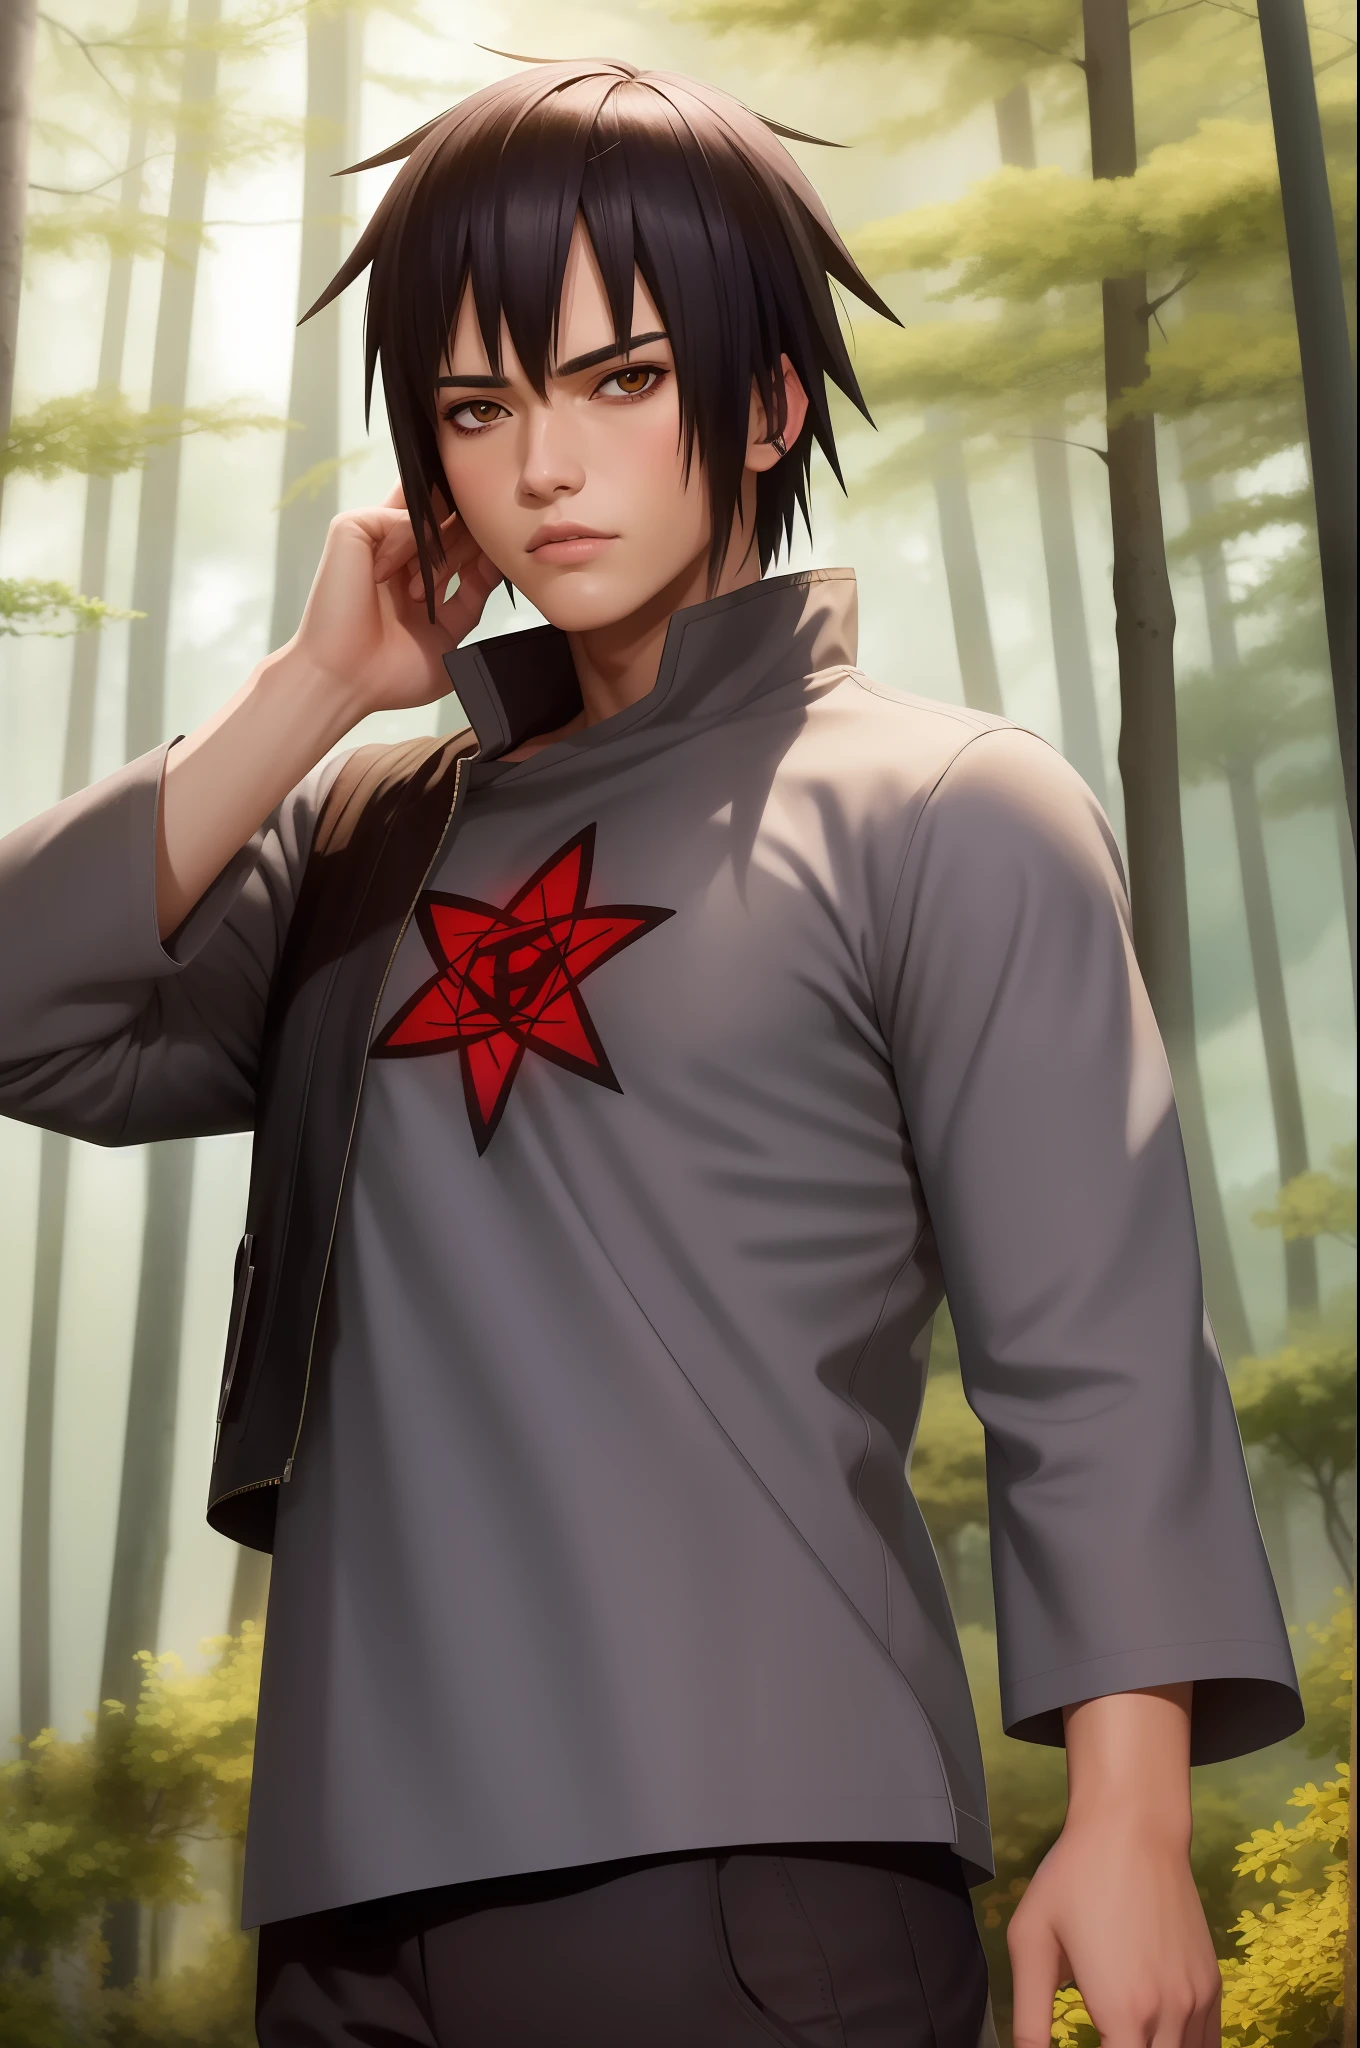 Super realistic image of a nine character based on the amine Naruto. He is very handsome, has flashy eyes. Thick, dark eyebrows. White skin. Confident look. Brown eyes. He holds in his hand one the kunai. In the background behind him is a shadowy forest.